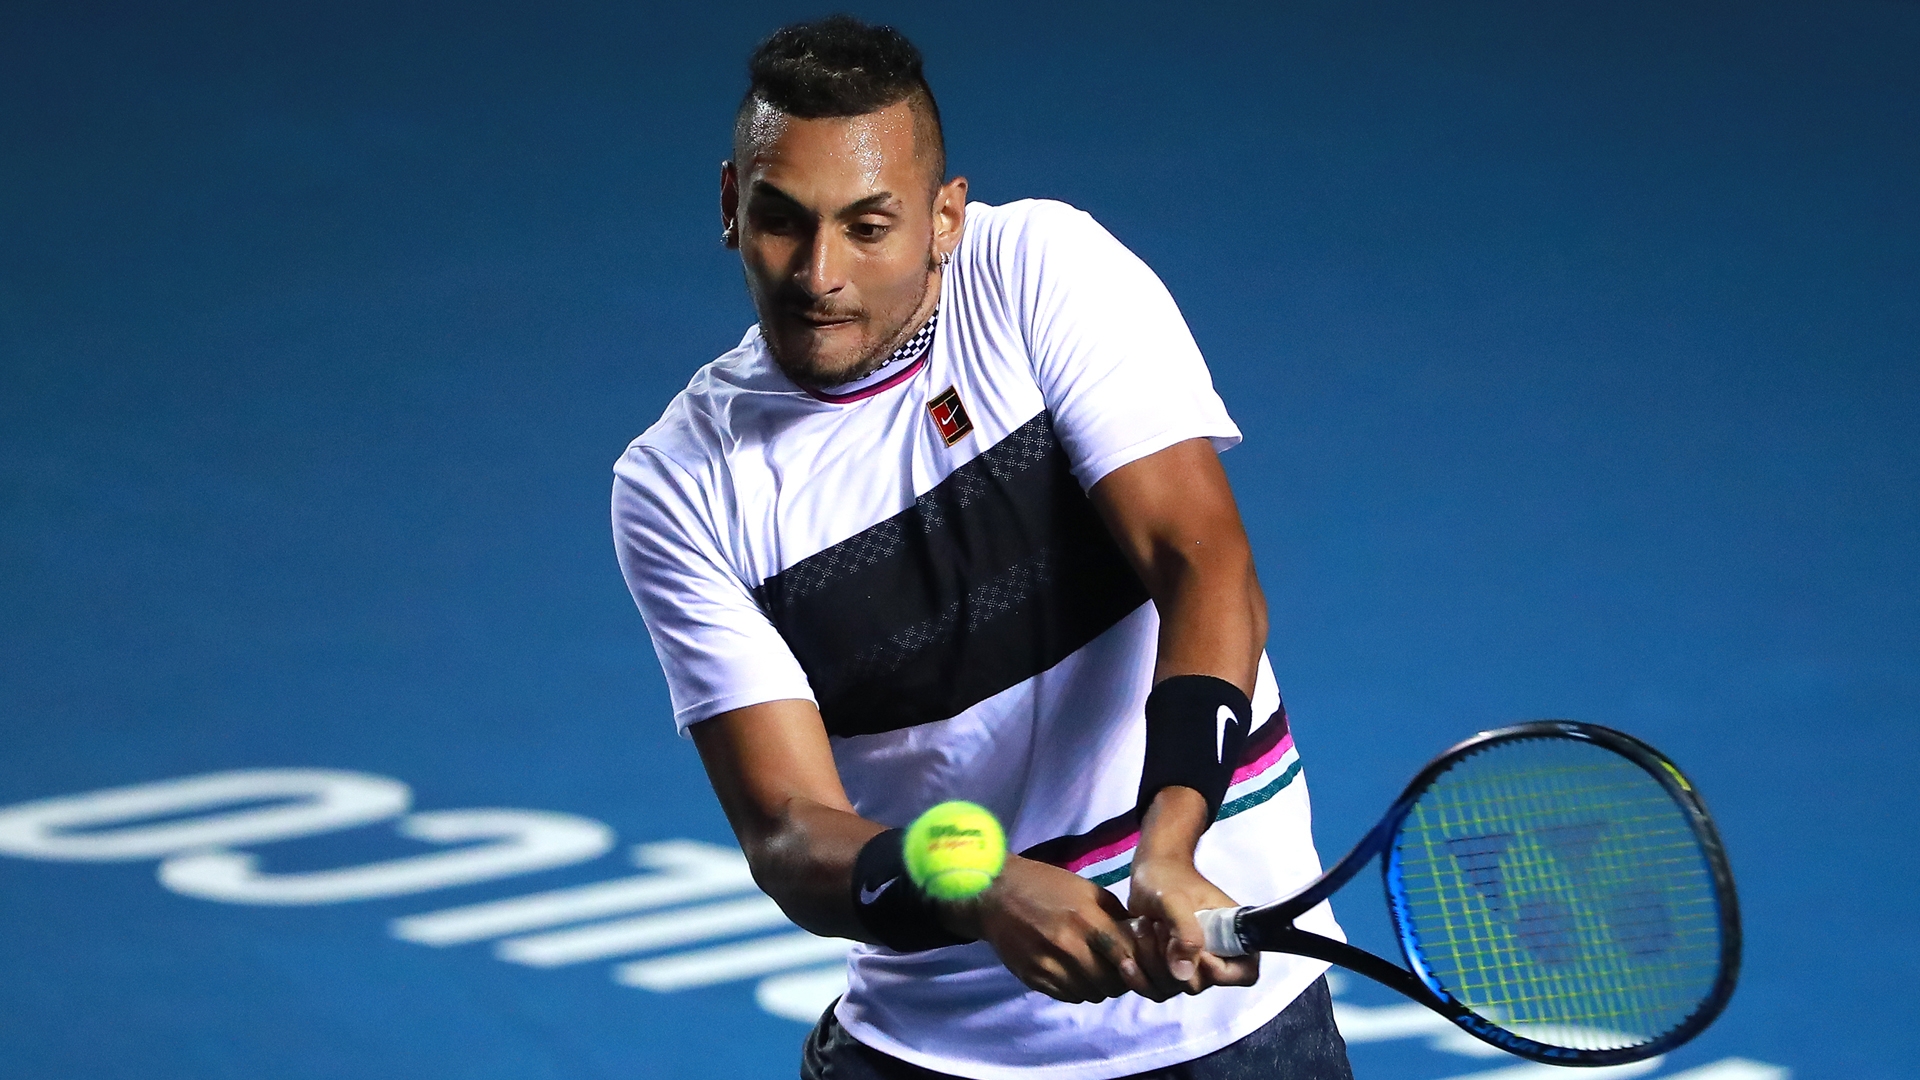 Mexican Open: Kyrgios stuns Nadal in Acapulco thriller